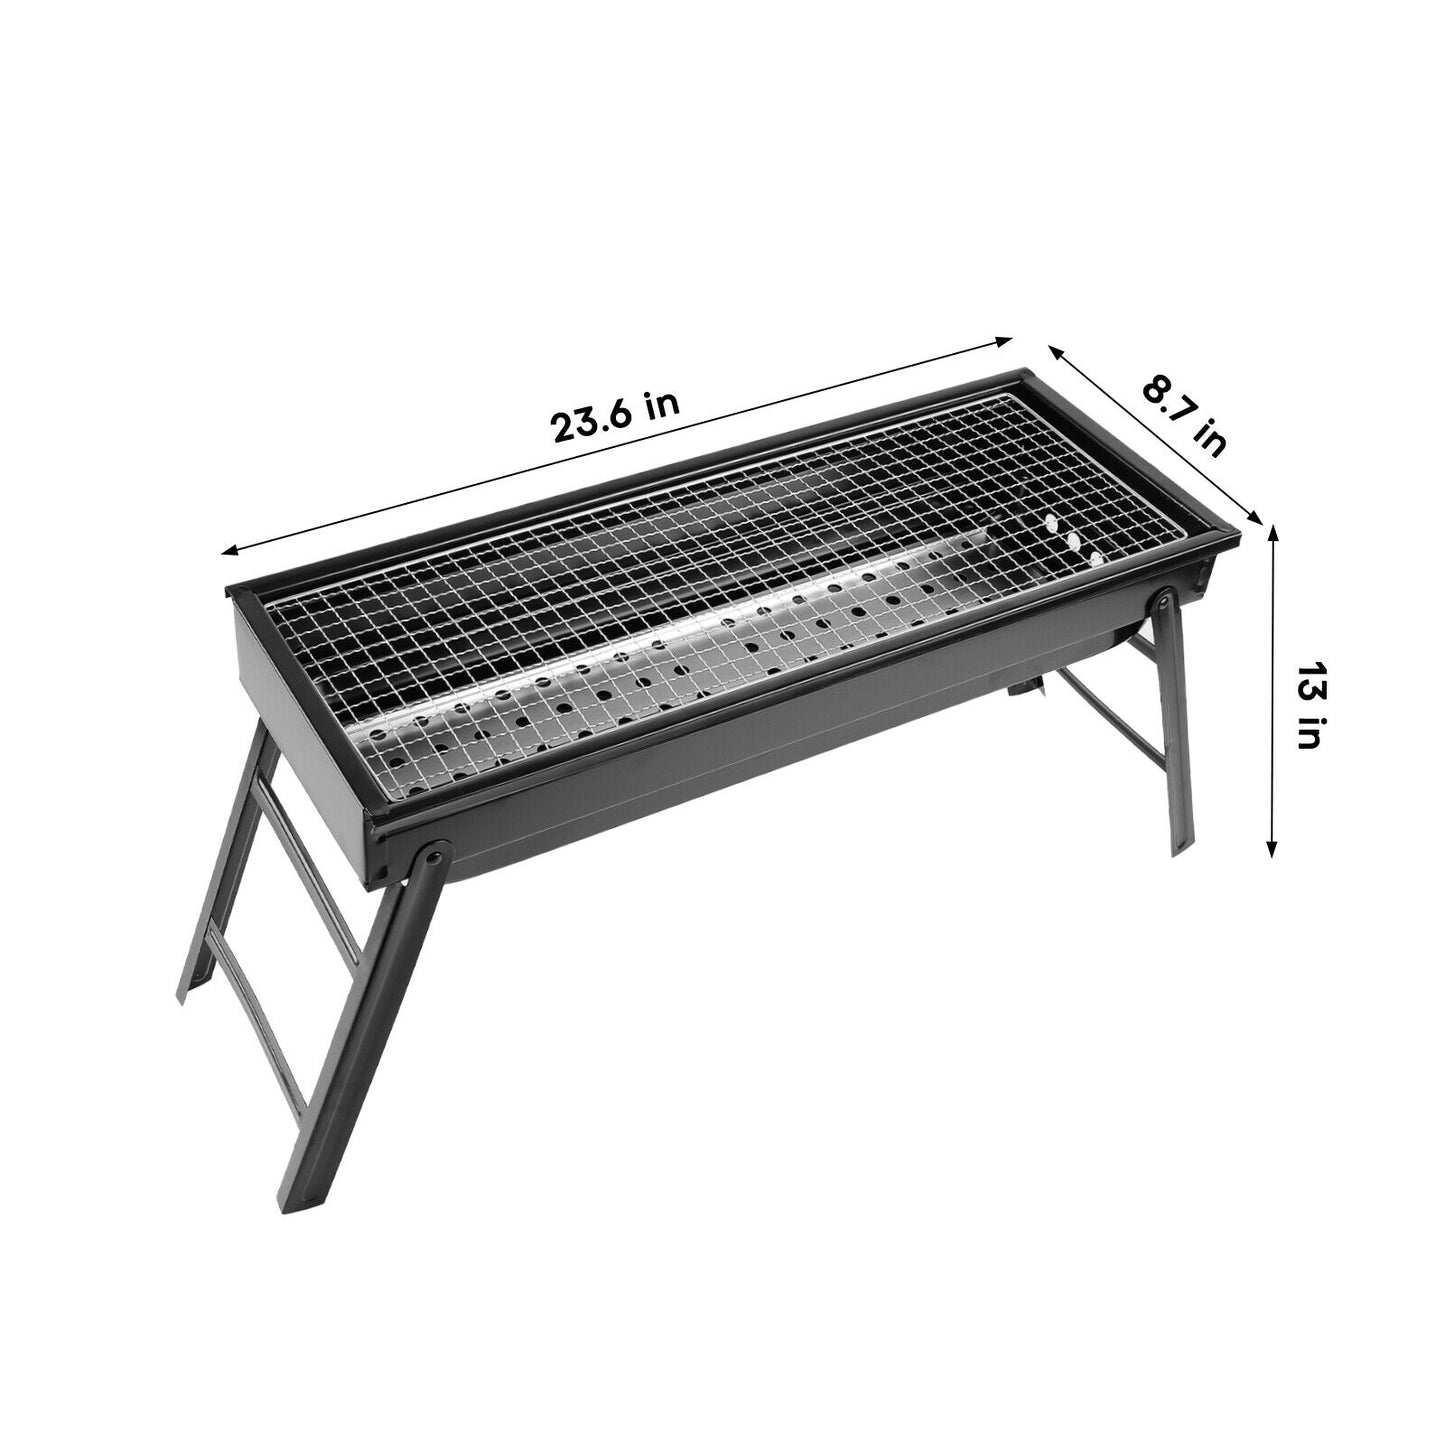 Portable Grill - Food Grade Stainless Steel Tabletop Grill